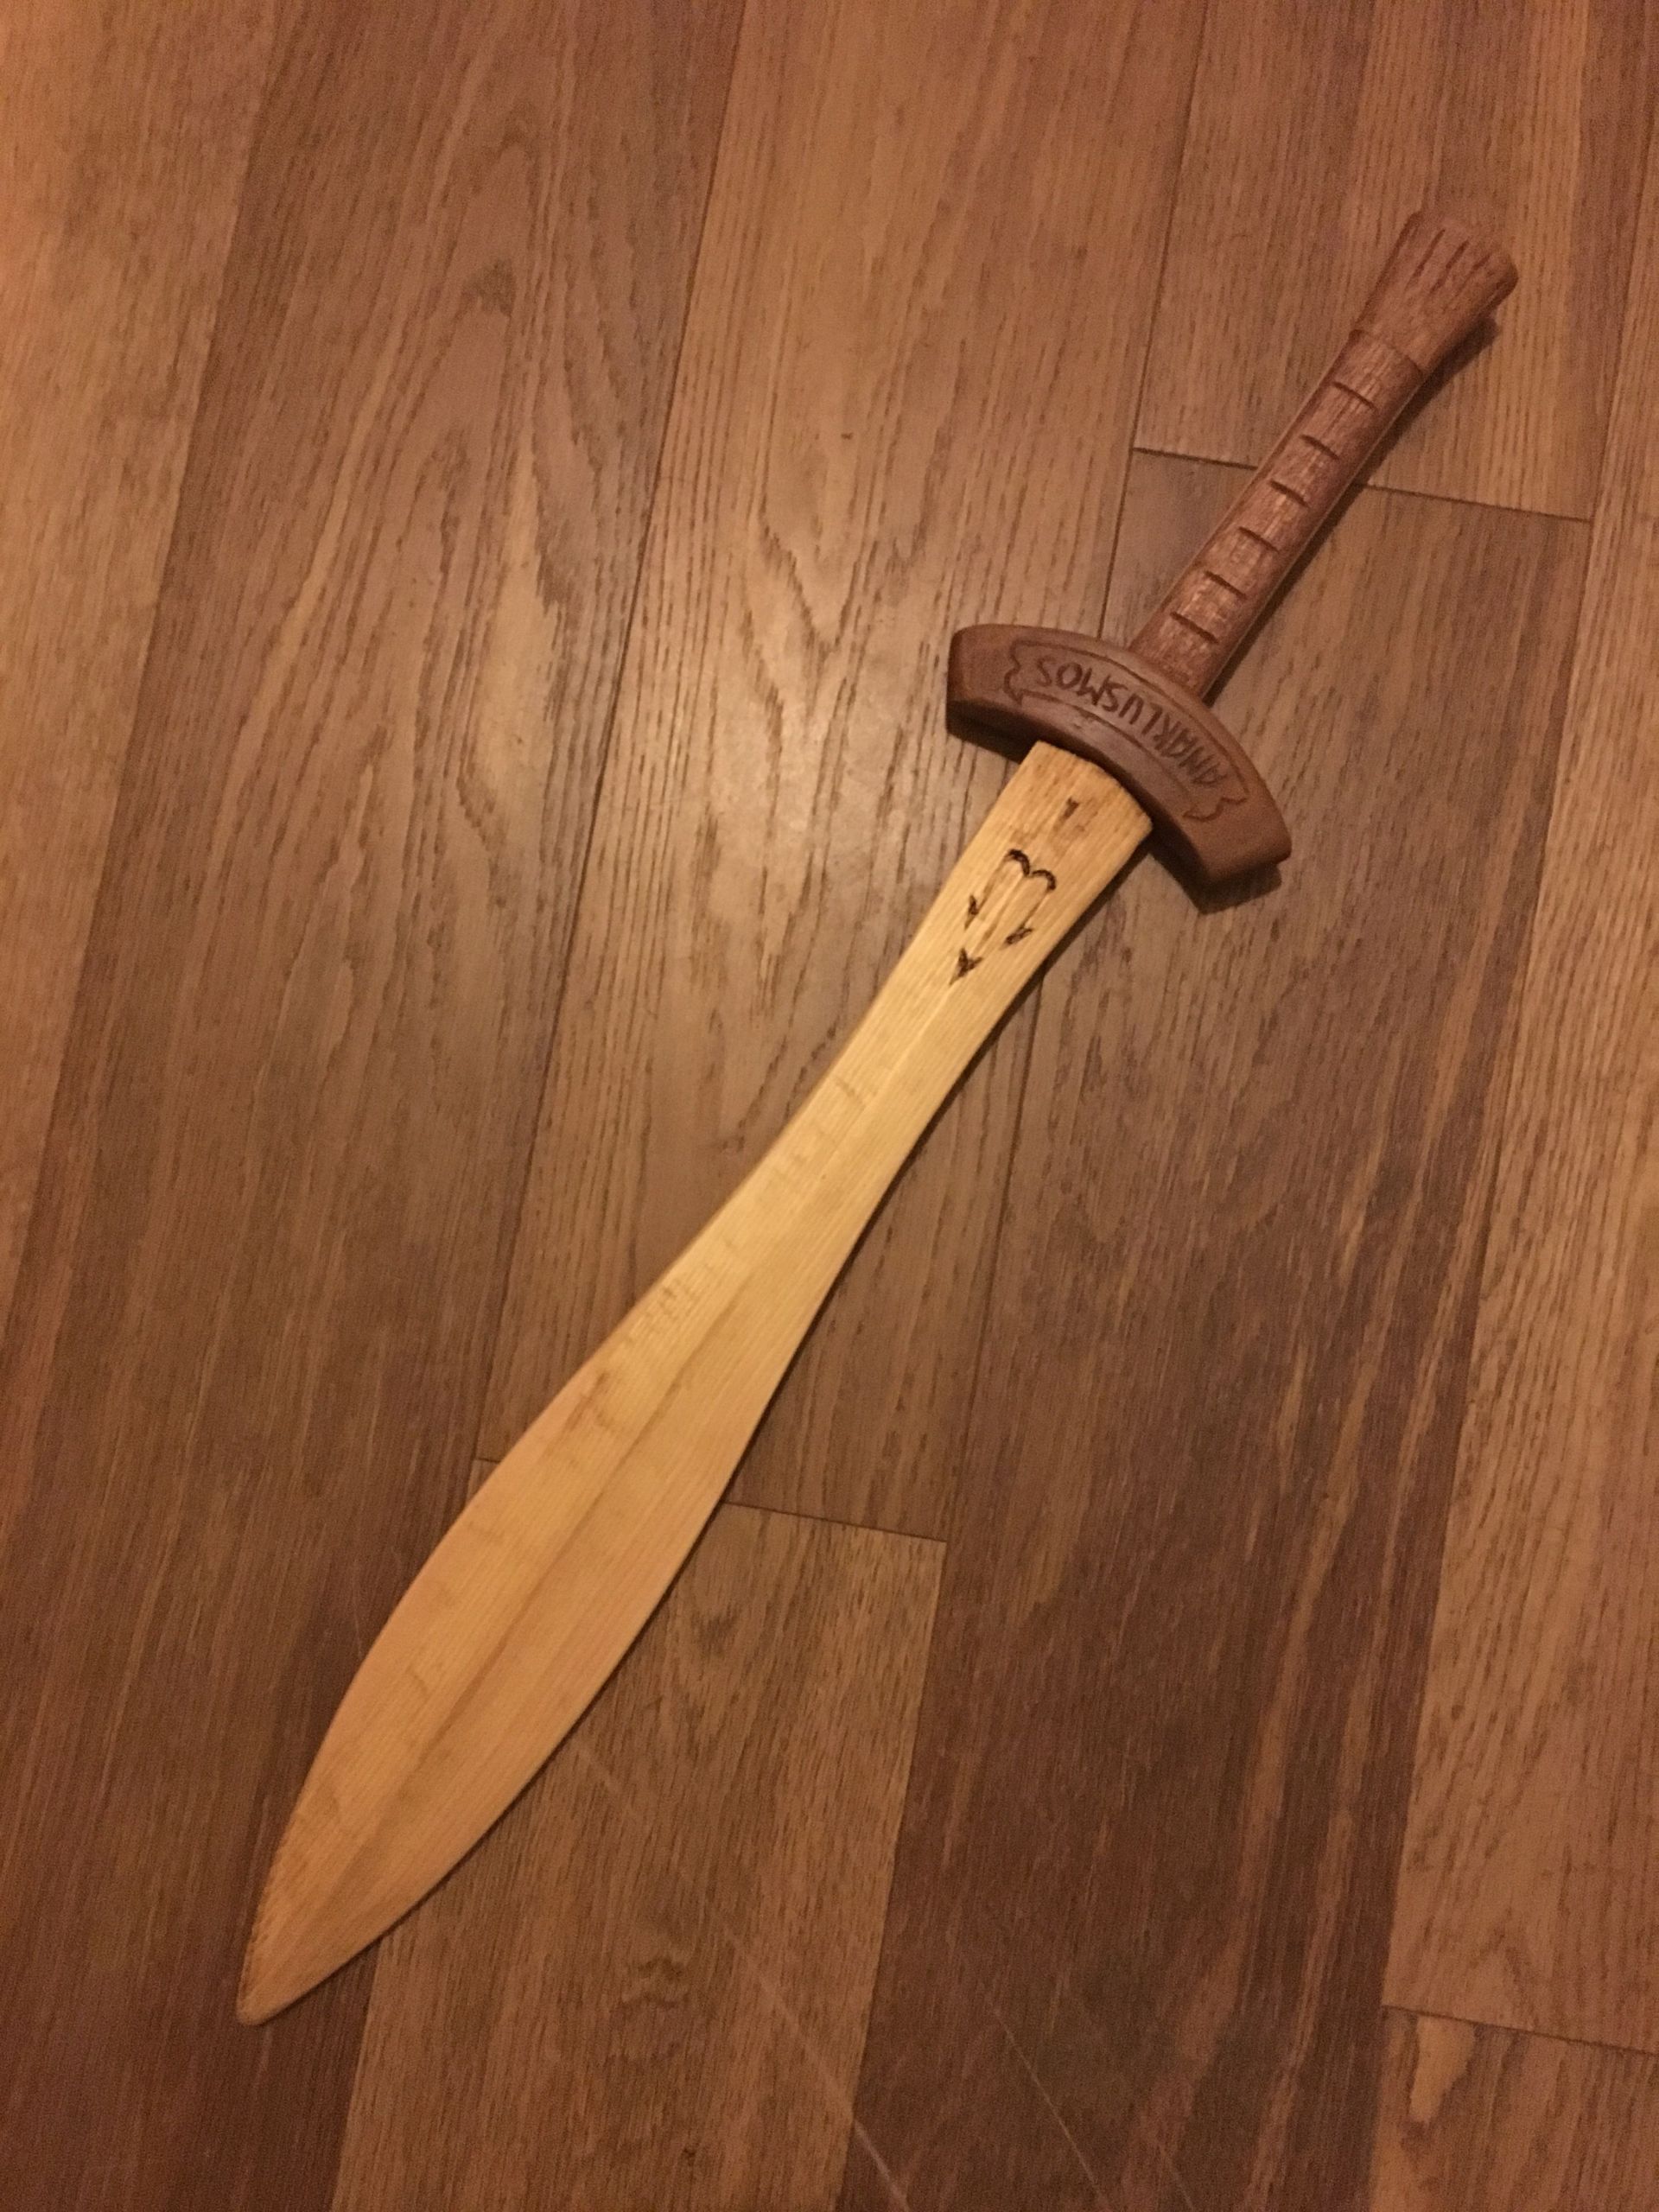 Wooden Sword DIY
 Wooden sword Riptide from the Percy Jackson books made